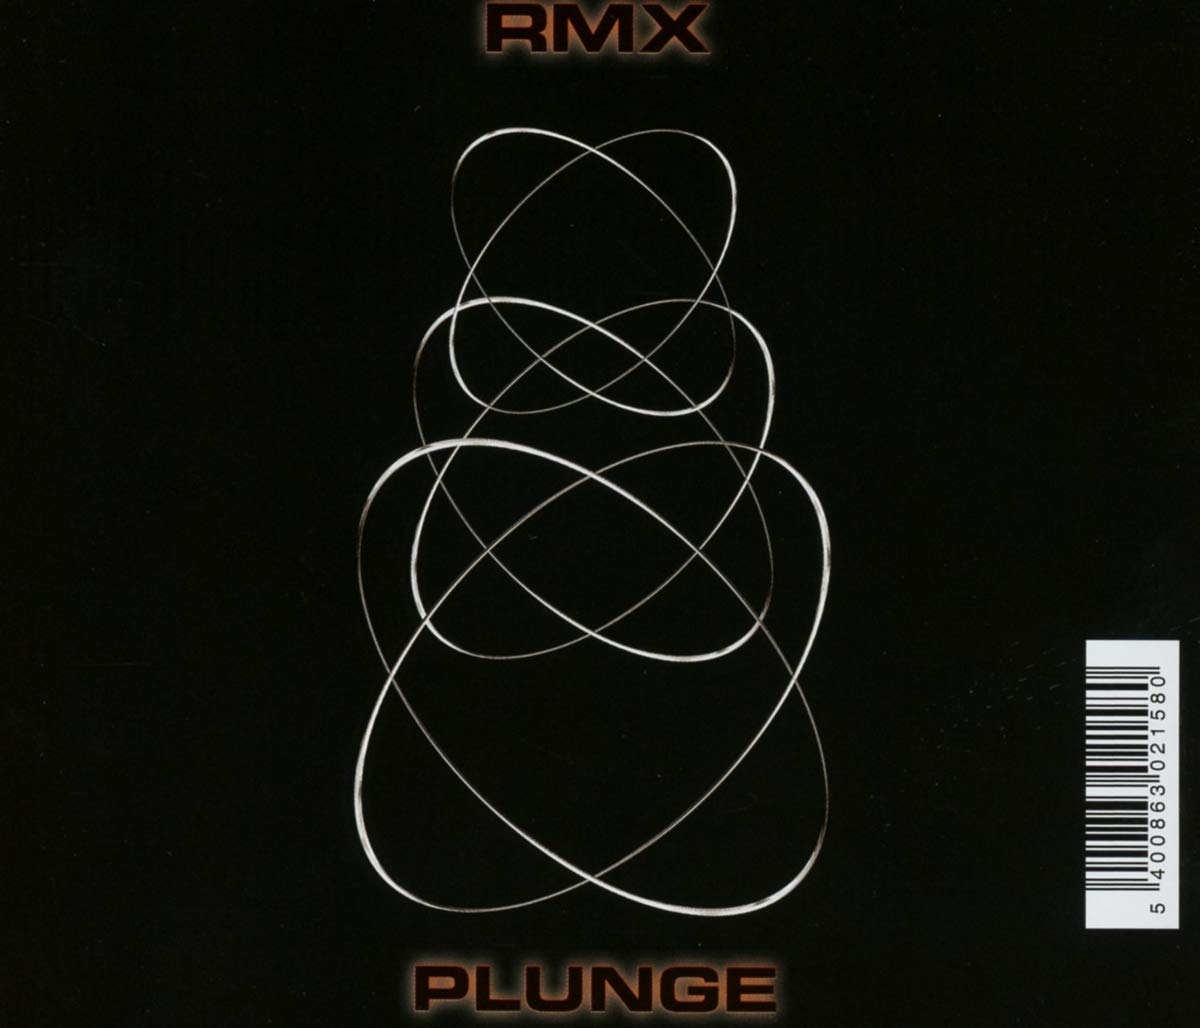 FEVER RAY – PLUNGE REMIX CD